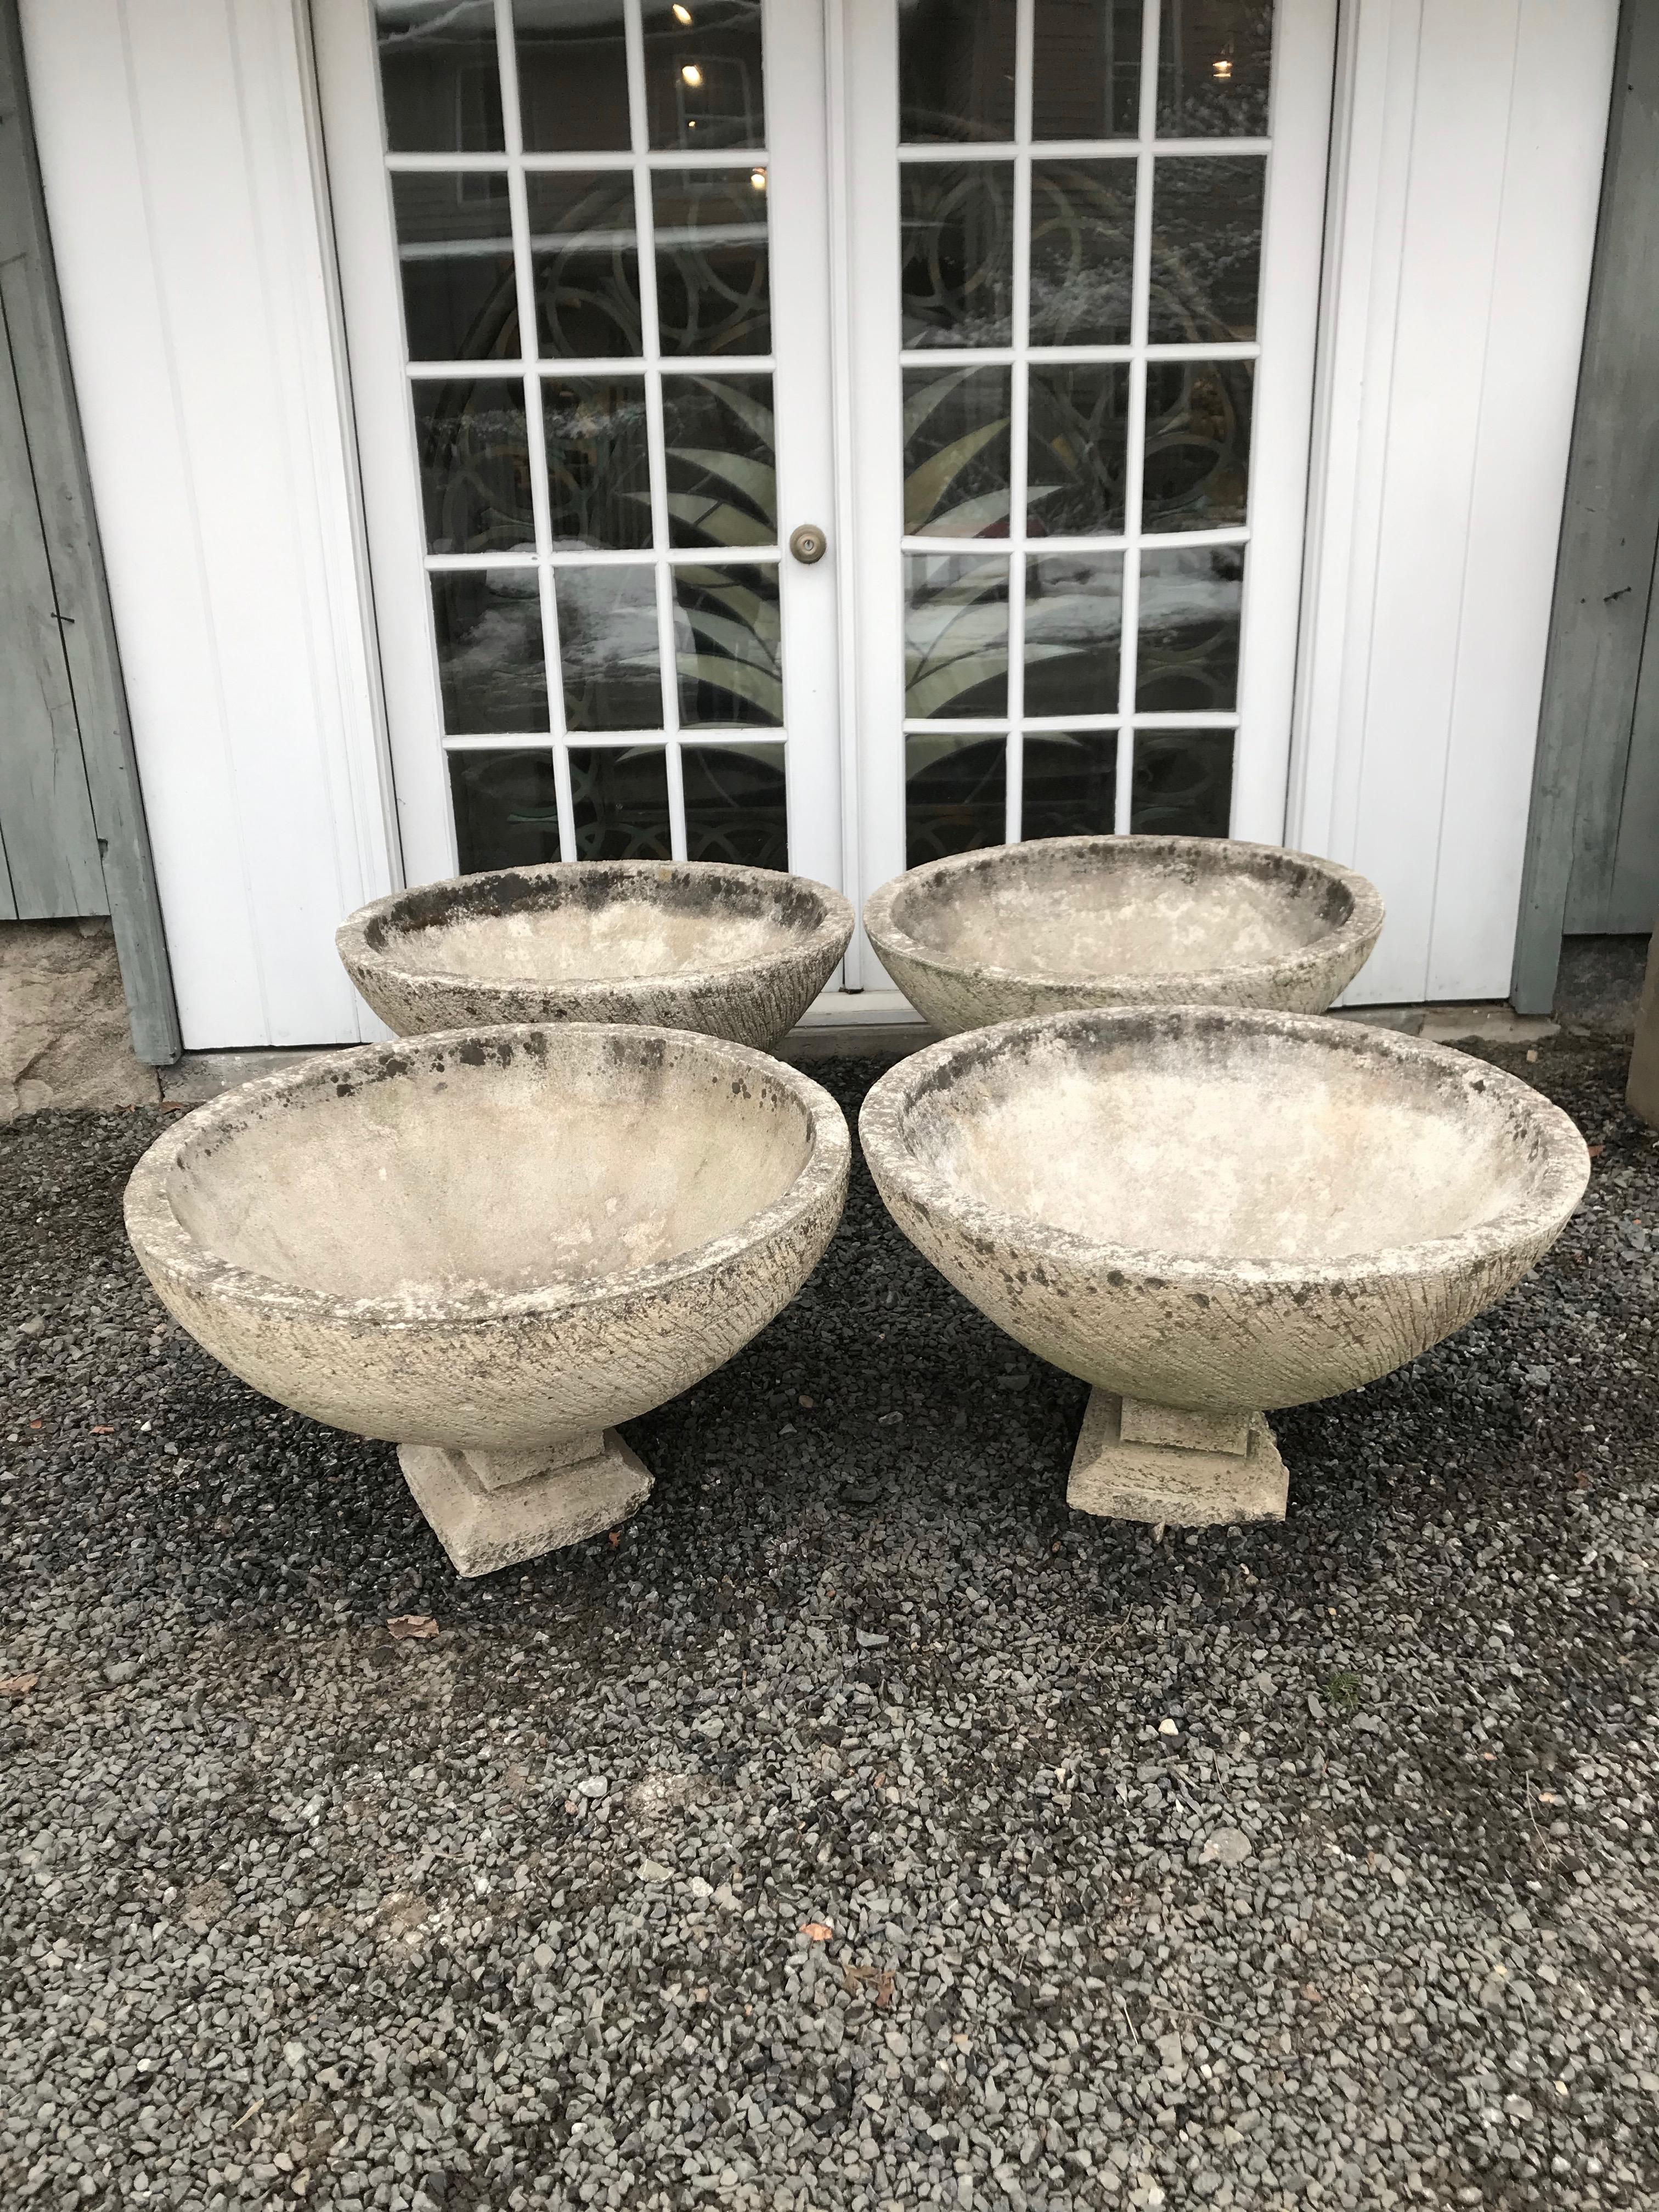 Pair of Large French Cast Stone Bowl Planters on Integral Feet #2 10